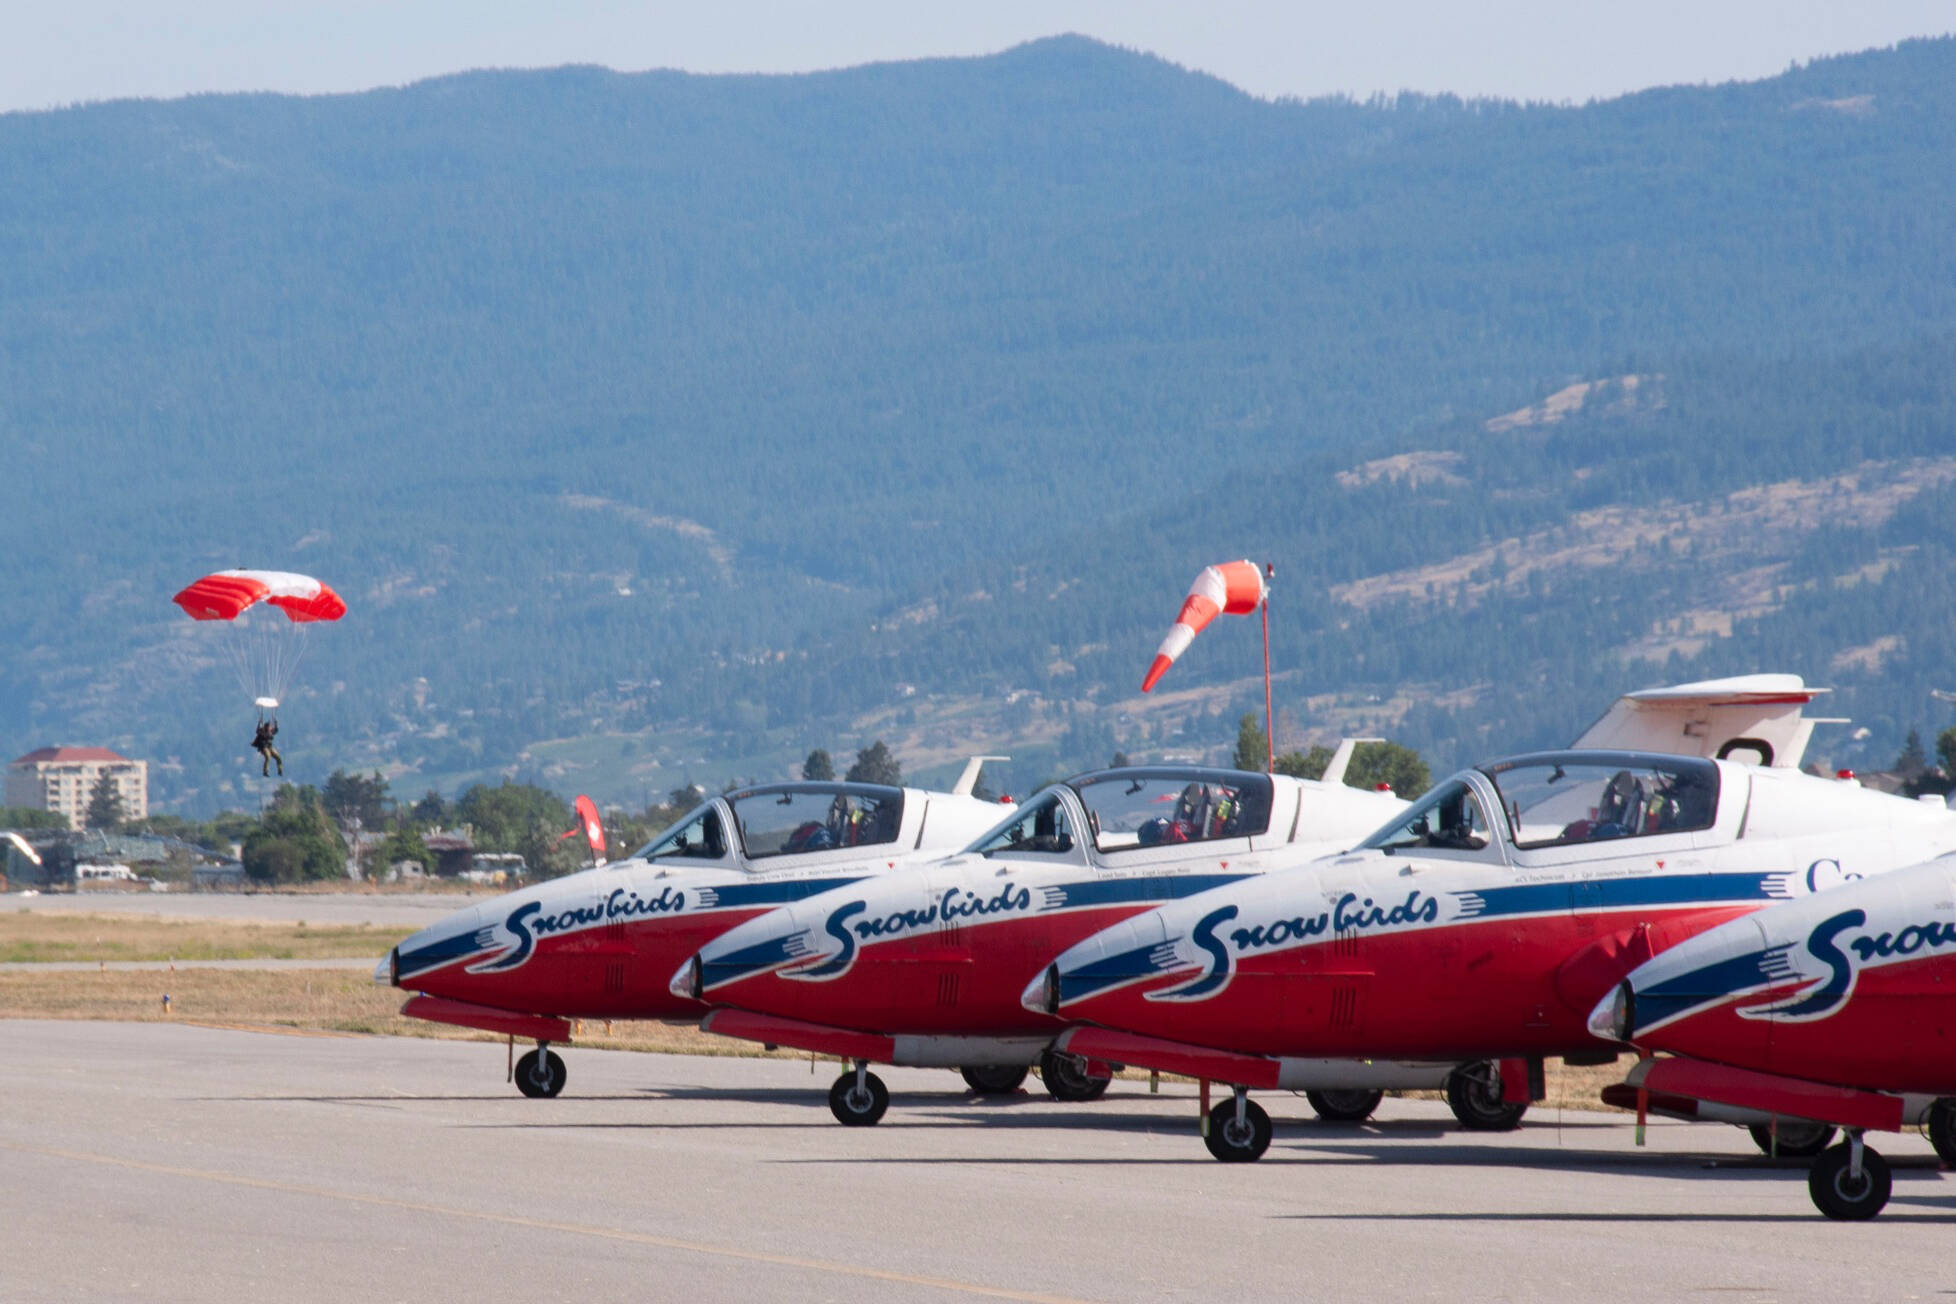 One of the Canadian Forces Snowbirds had a minor crash at an airshow in Fort St. John on Tuesday, grounding the pilots for the Penticton Peach Festival performance that was supposed to happen Wednesday.